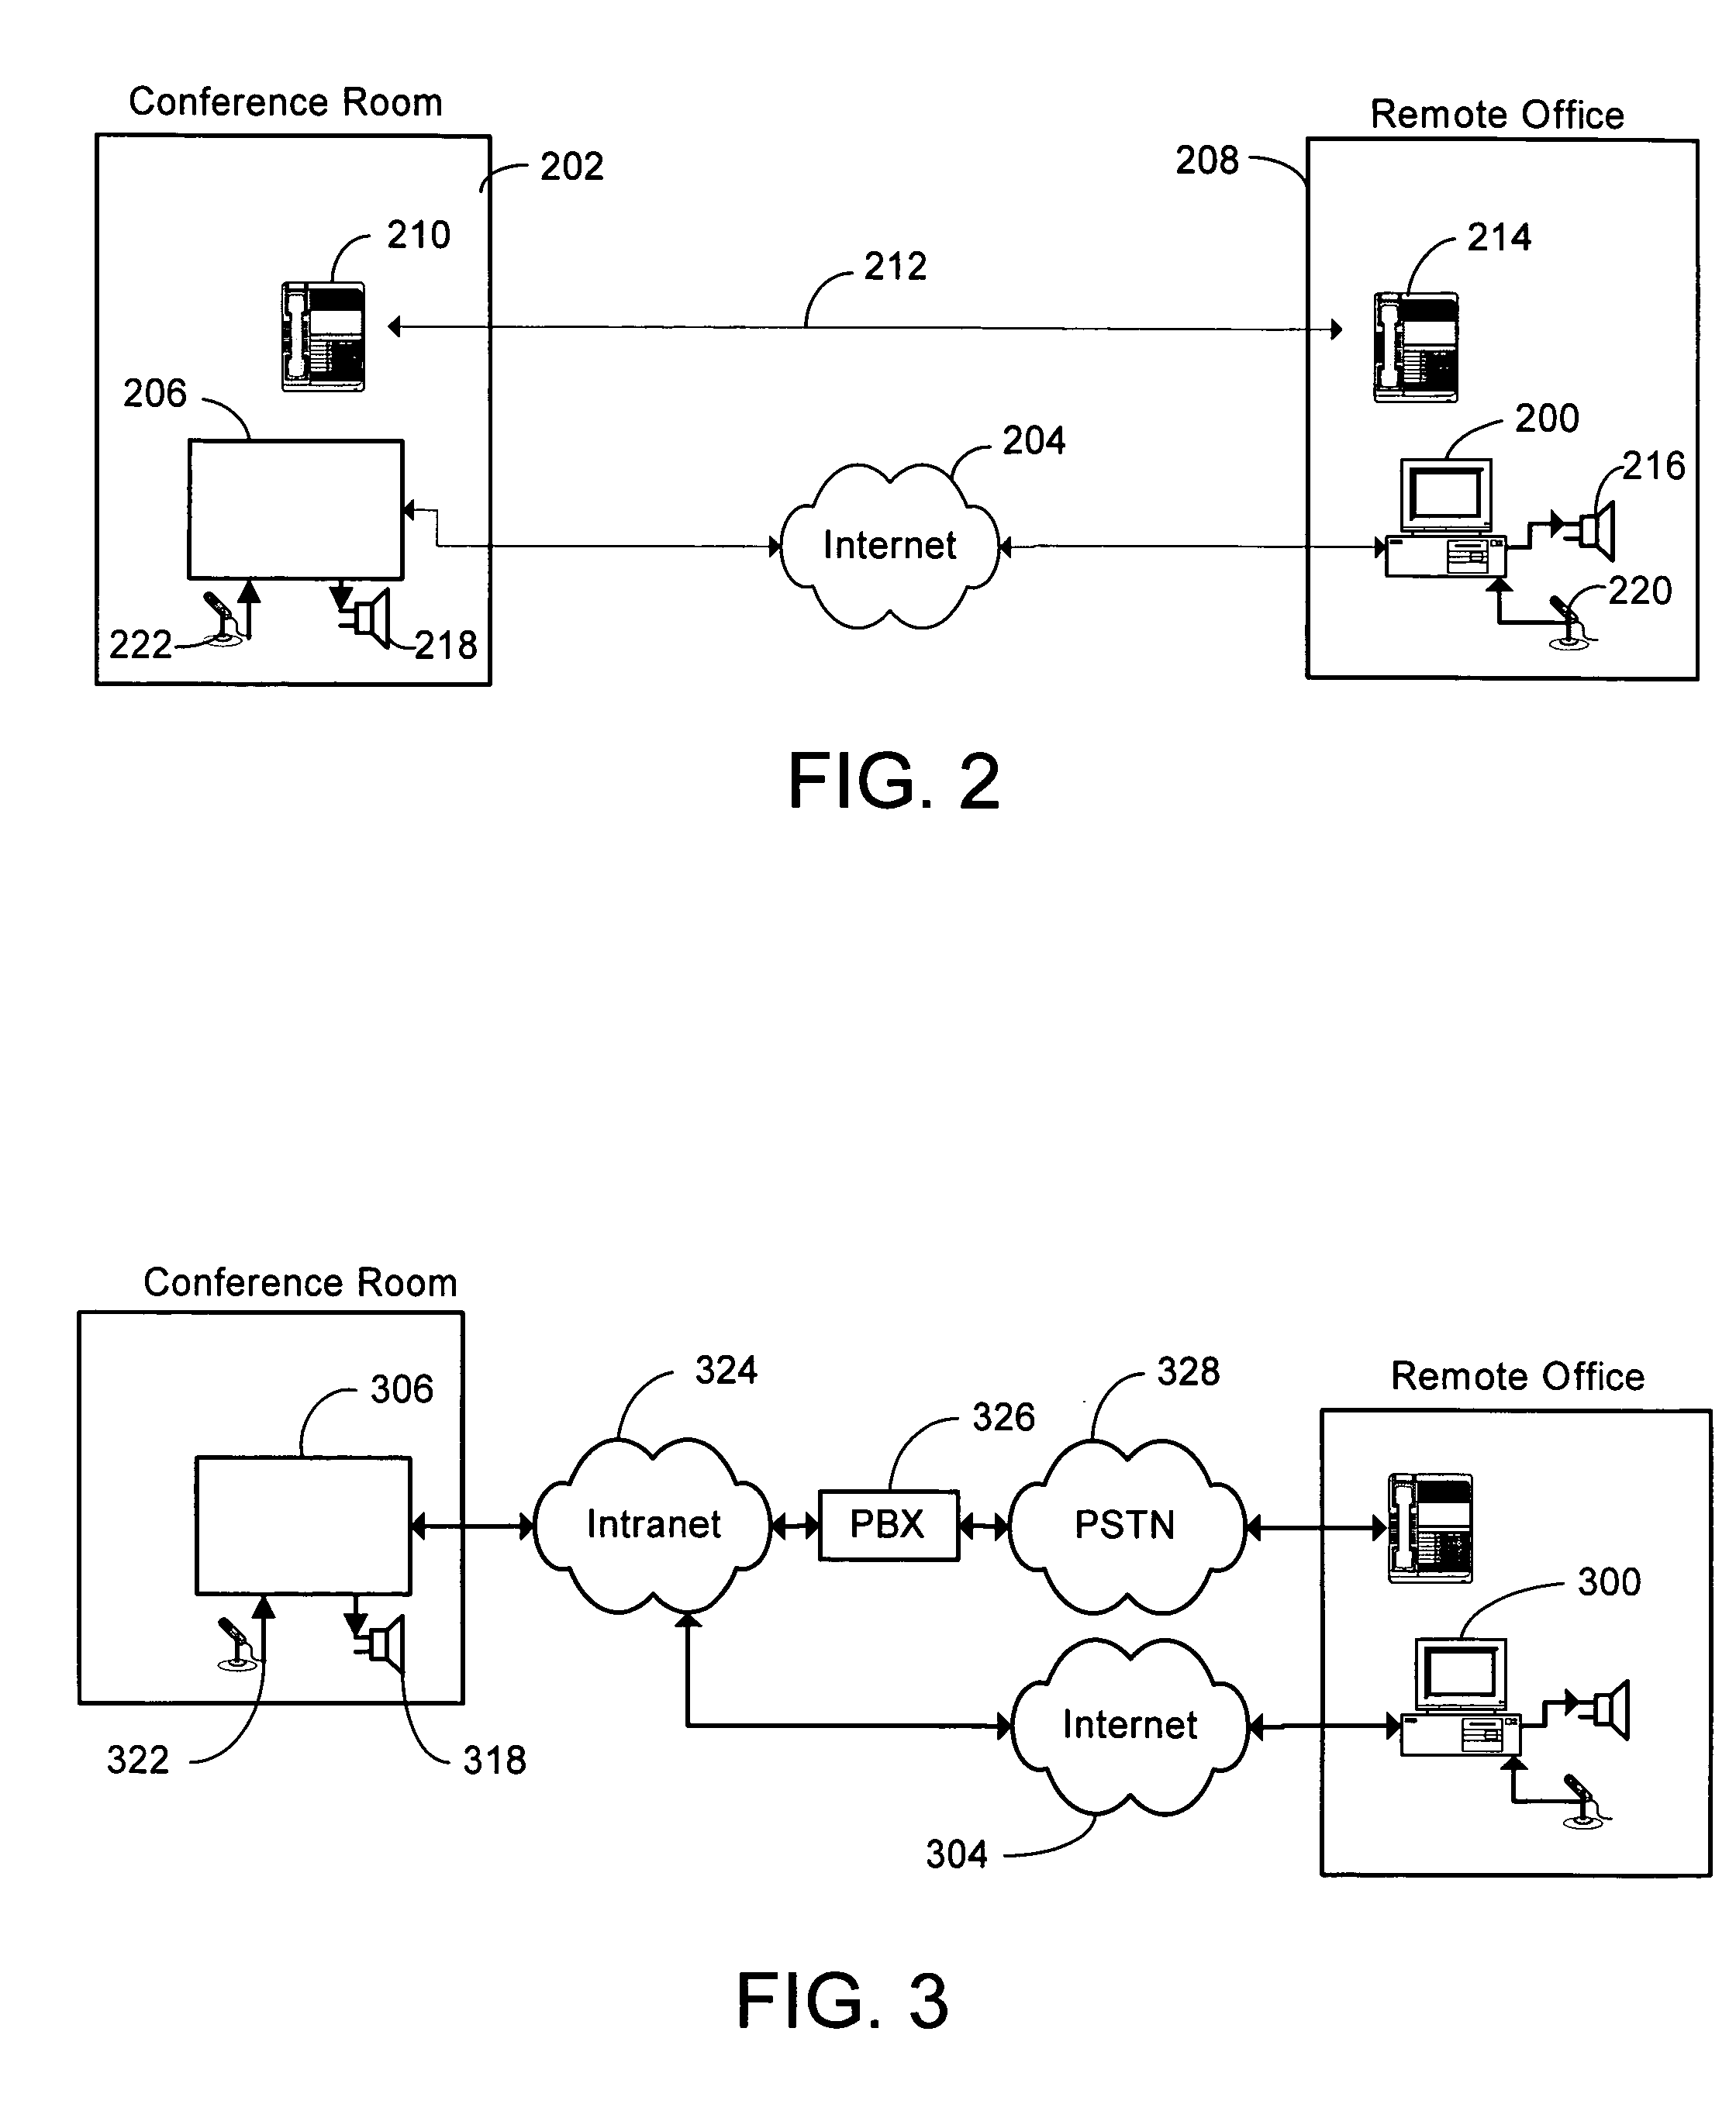 System and process for discovery of network-connected devices at remote sites using audio-based discovery techniques